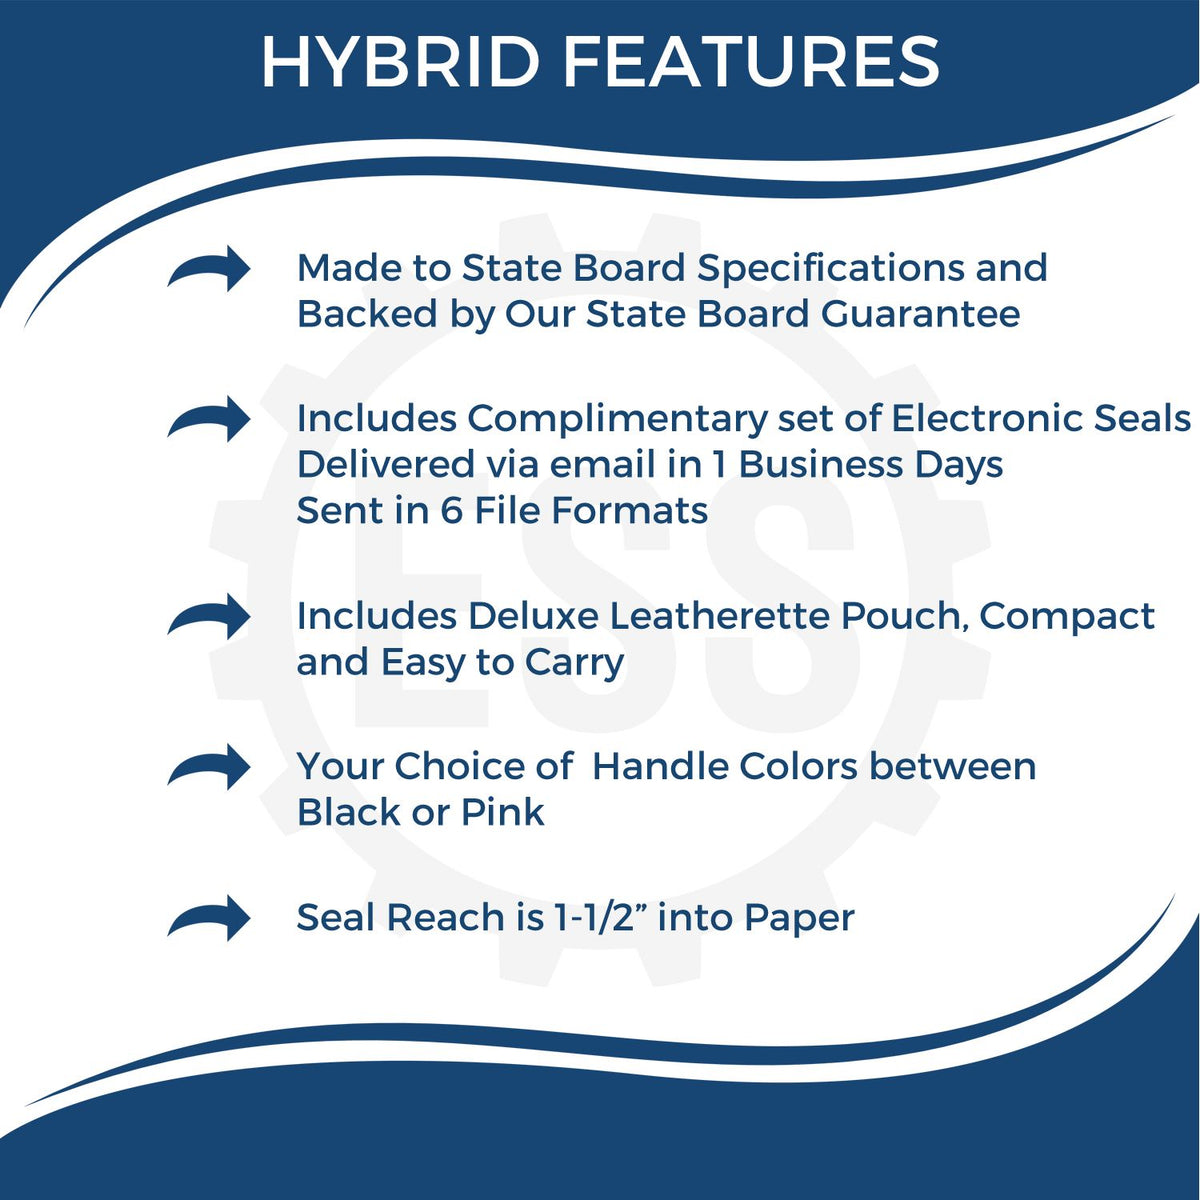 A picture of an infographic highlighting the selling points for the Hybrid Indiana Land Surveyor Seal